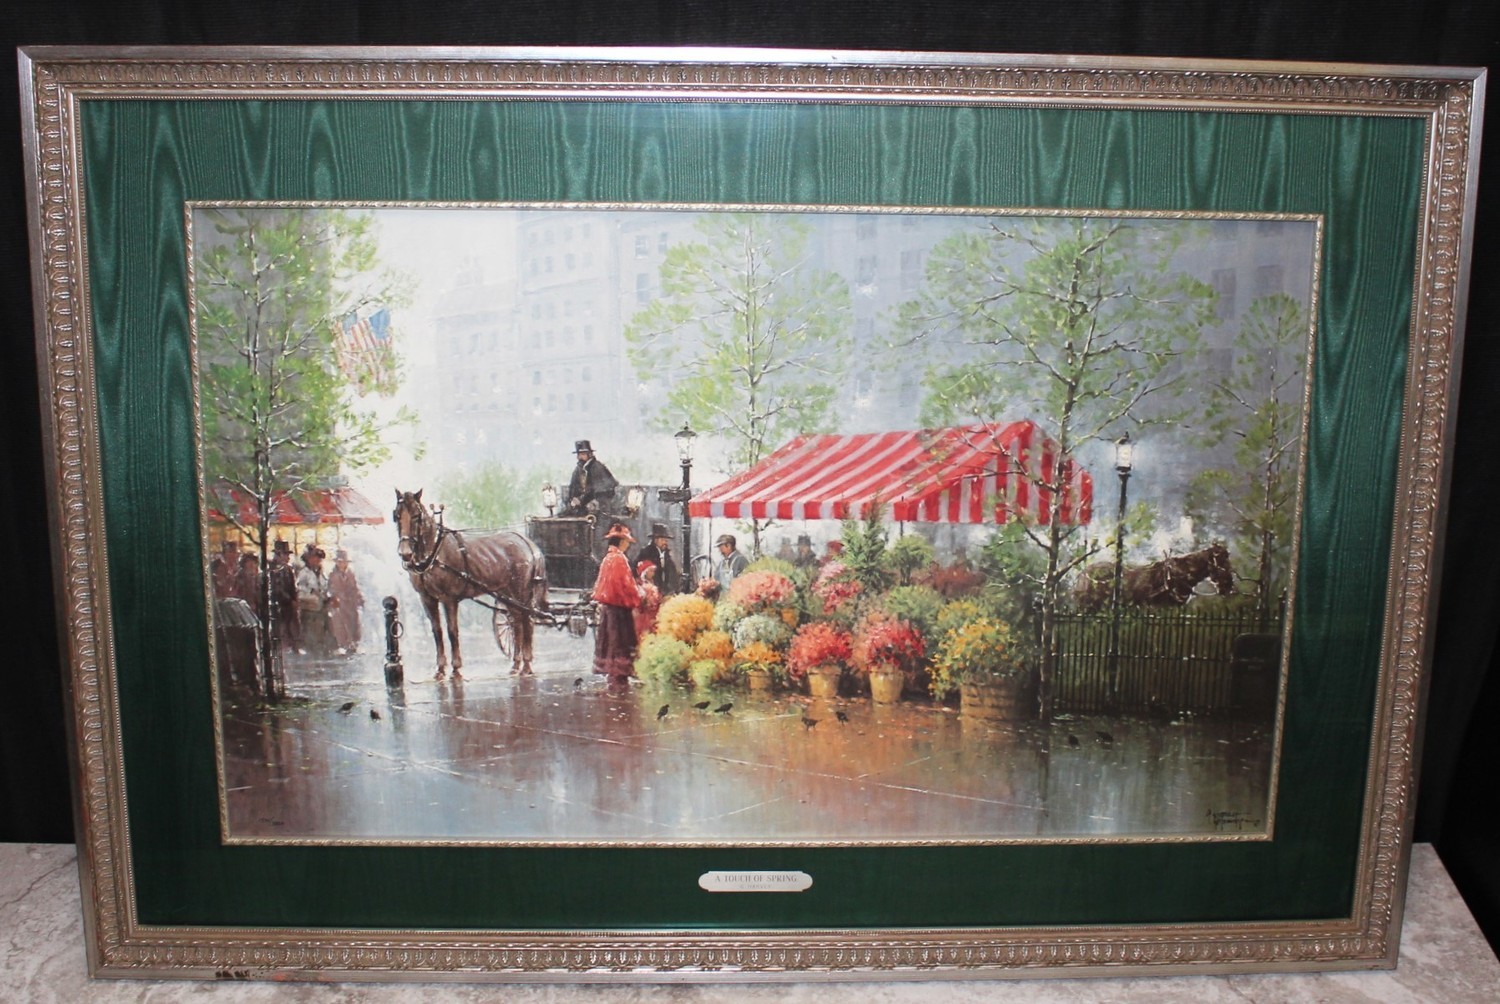 G. Harvey 1991 “A Touch of Spring” 41” x 28” Framed Print S/N 1570/3550 with COA